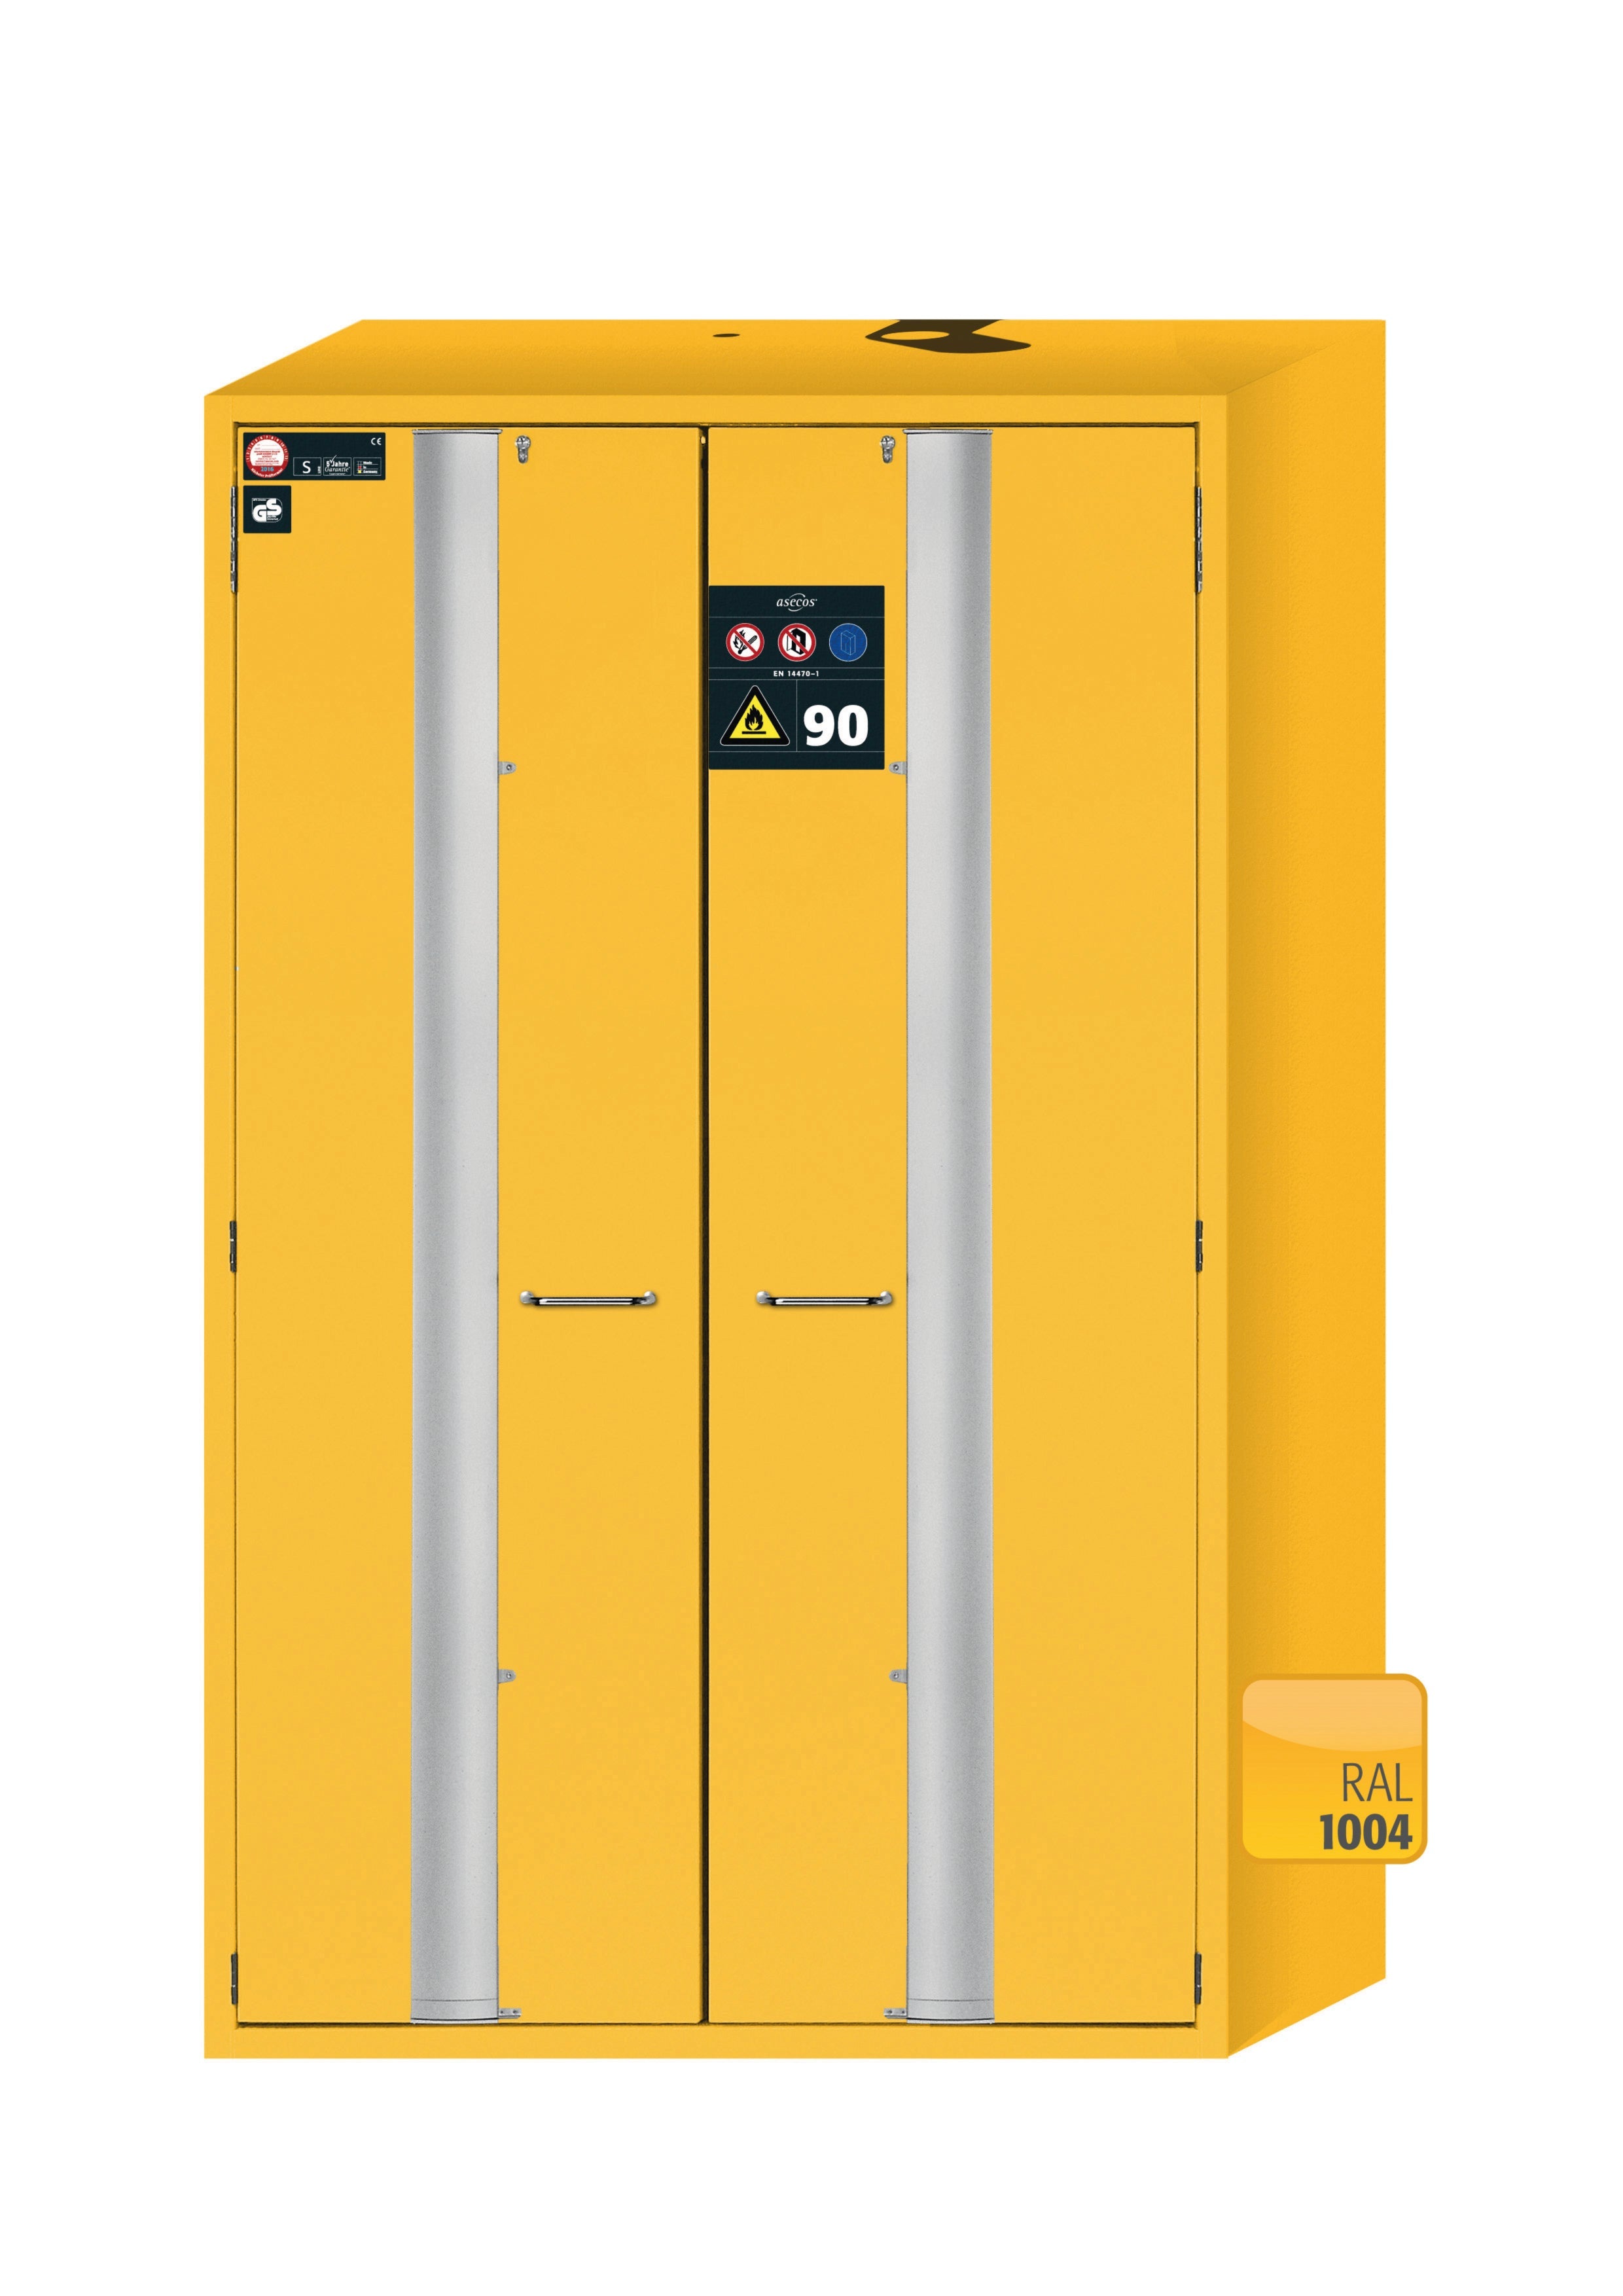 Type 90 safety storage cabinet S-PHOENIX-90 model S90.196.120.FDAS in warning yellow RAL 1004 with 5x drawer (standard) (stainless steel 1.4301),